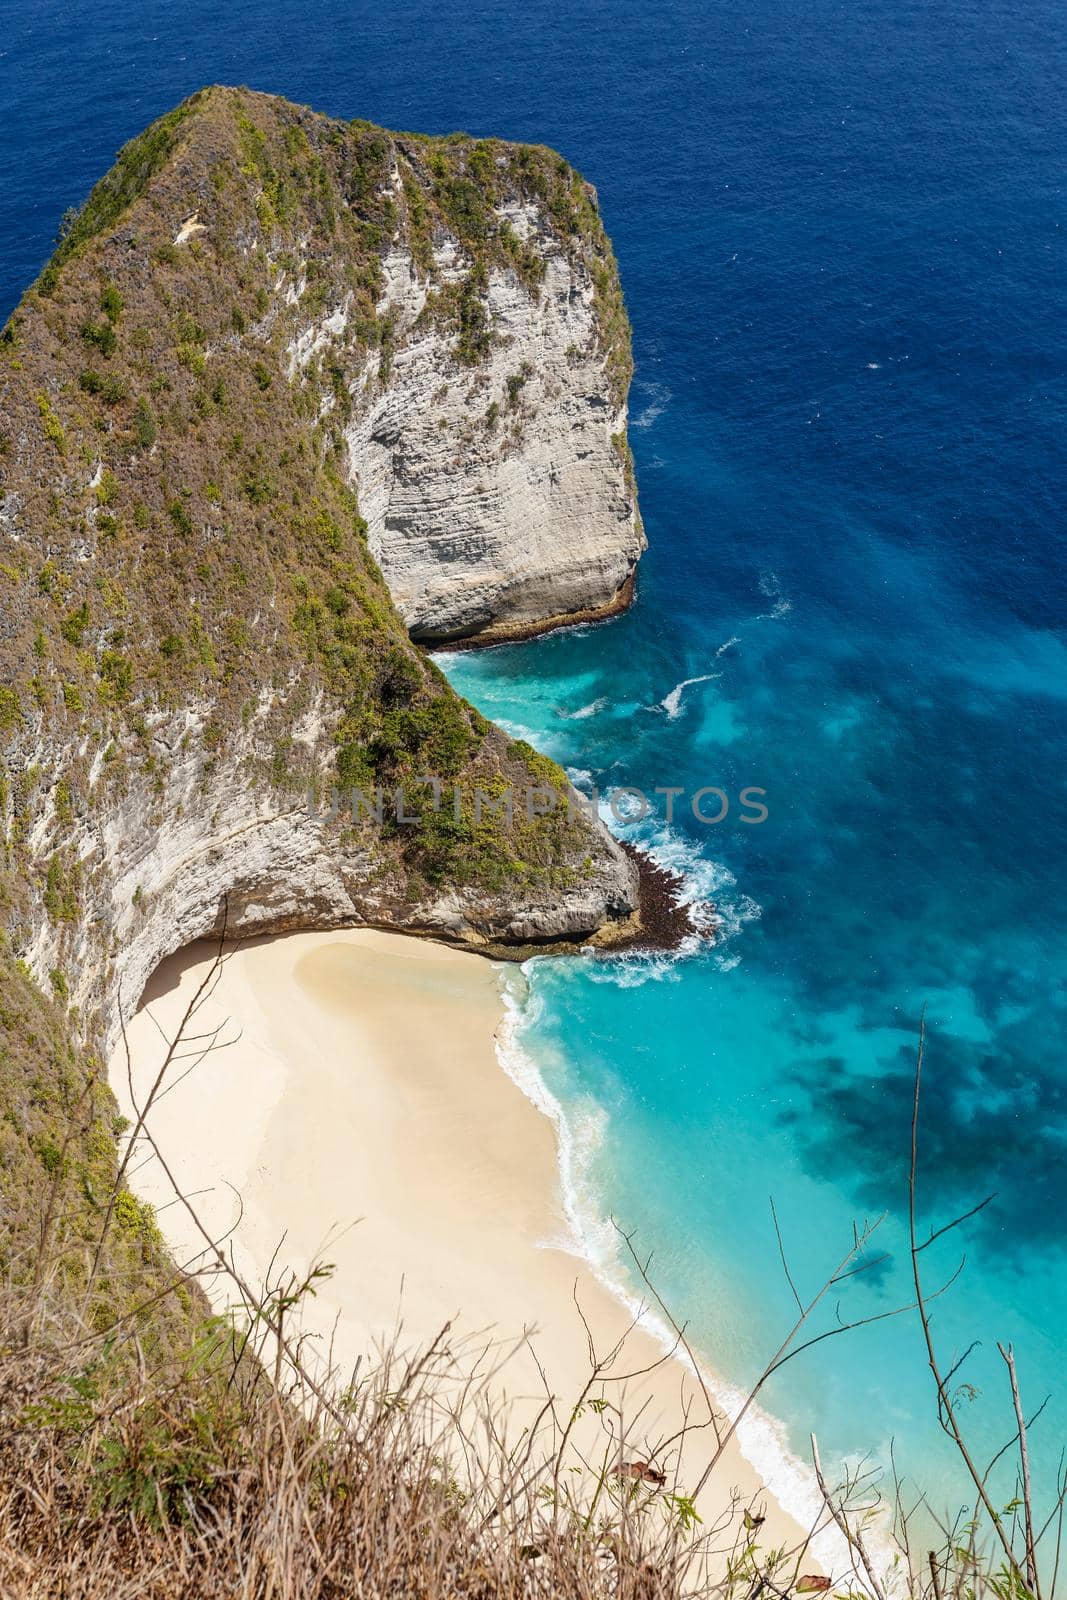 famous Manta Bay or Kelingking Beach before the construction of the trail down to the beach on Nusa Penida Island, Bali, Indonesia